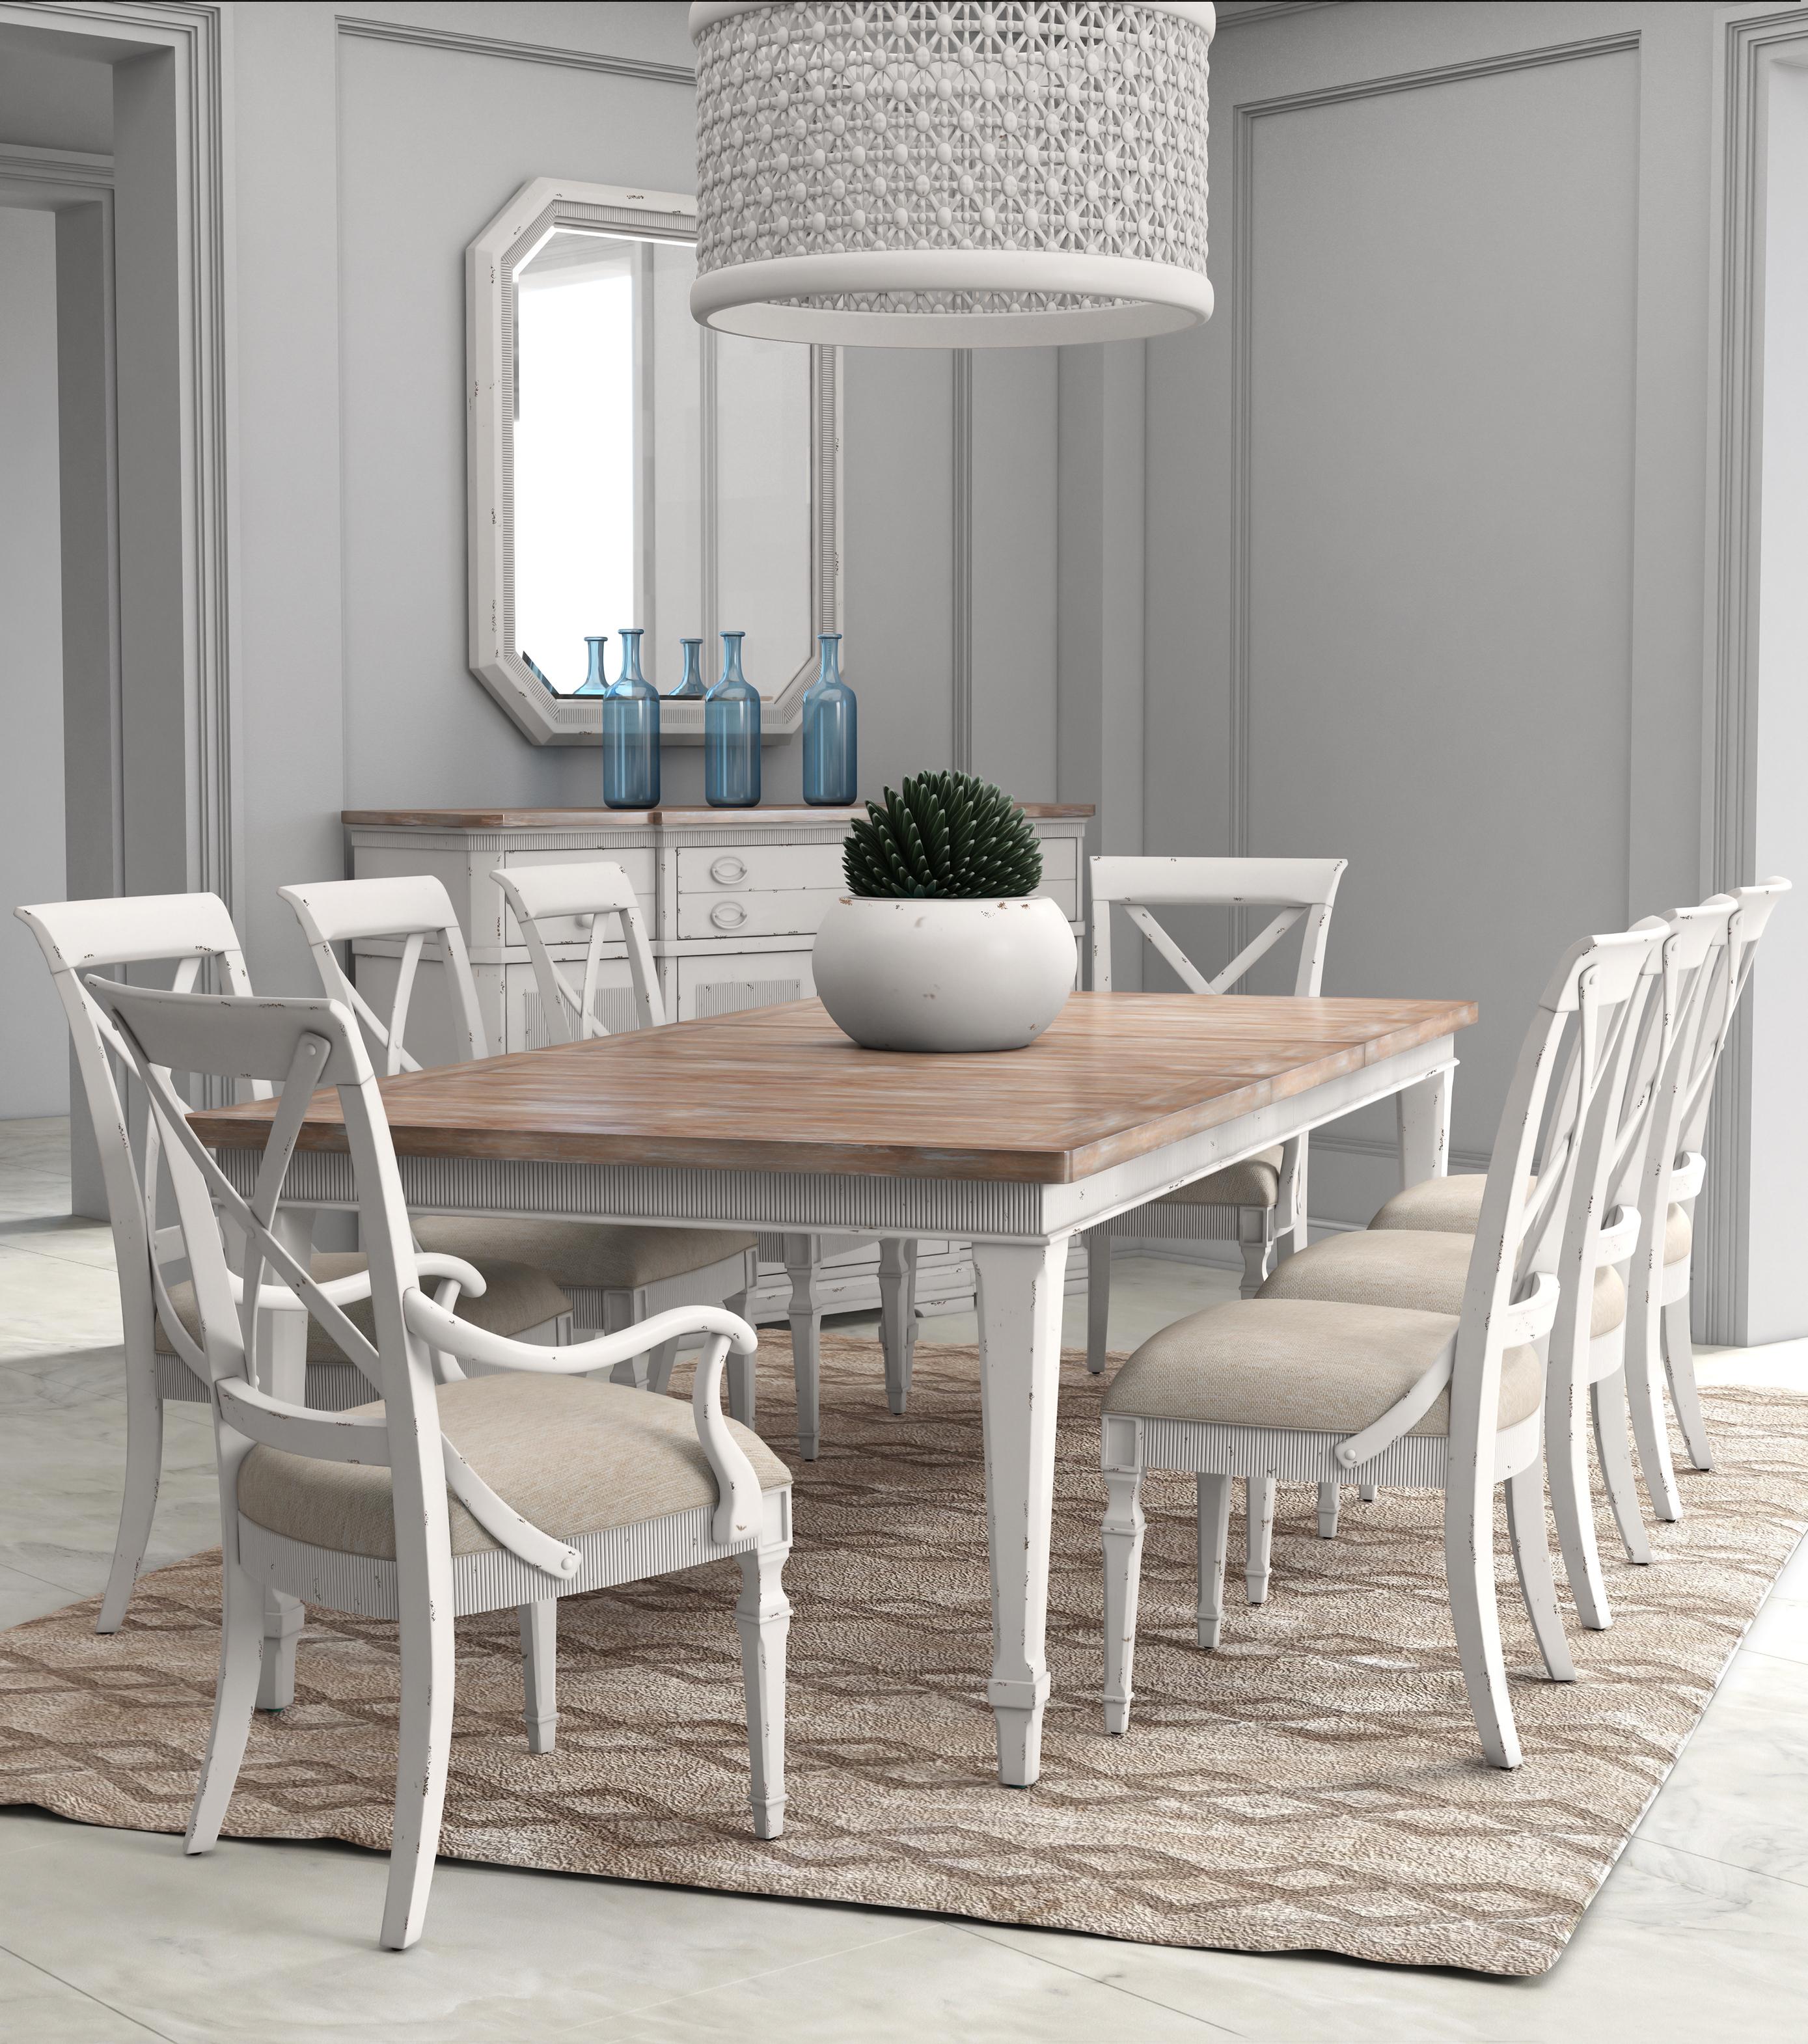 Urban, Farmhouse Dining Table Set Palisade 273220-2908-7pcs in Light Brown, Beige Fabric